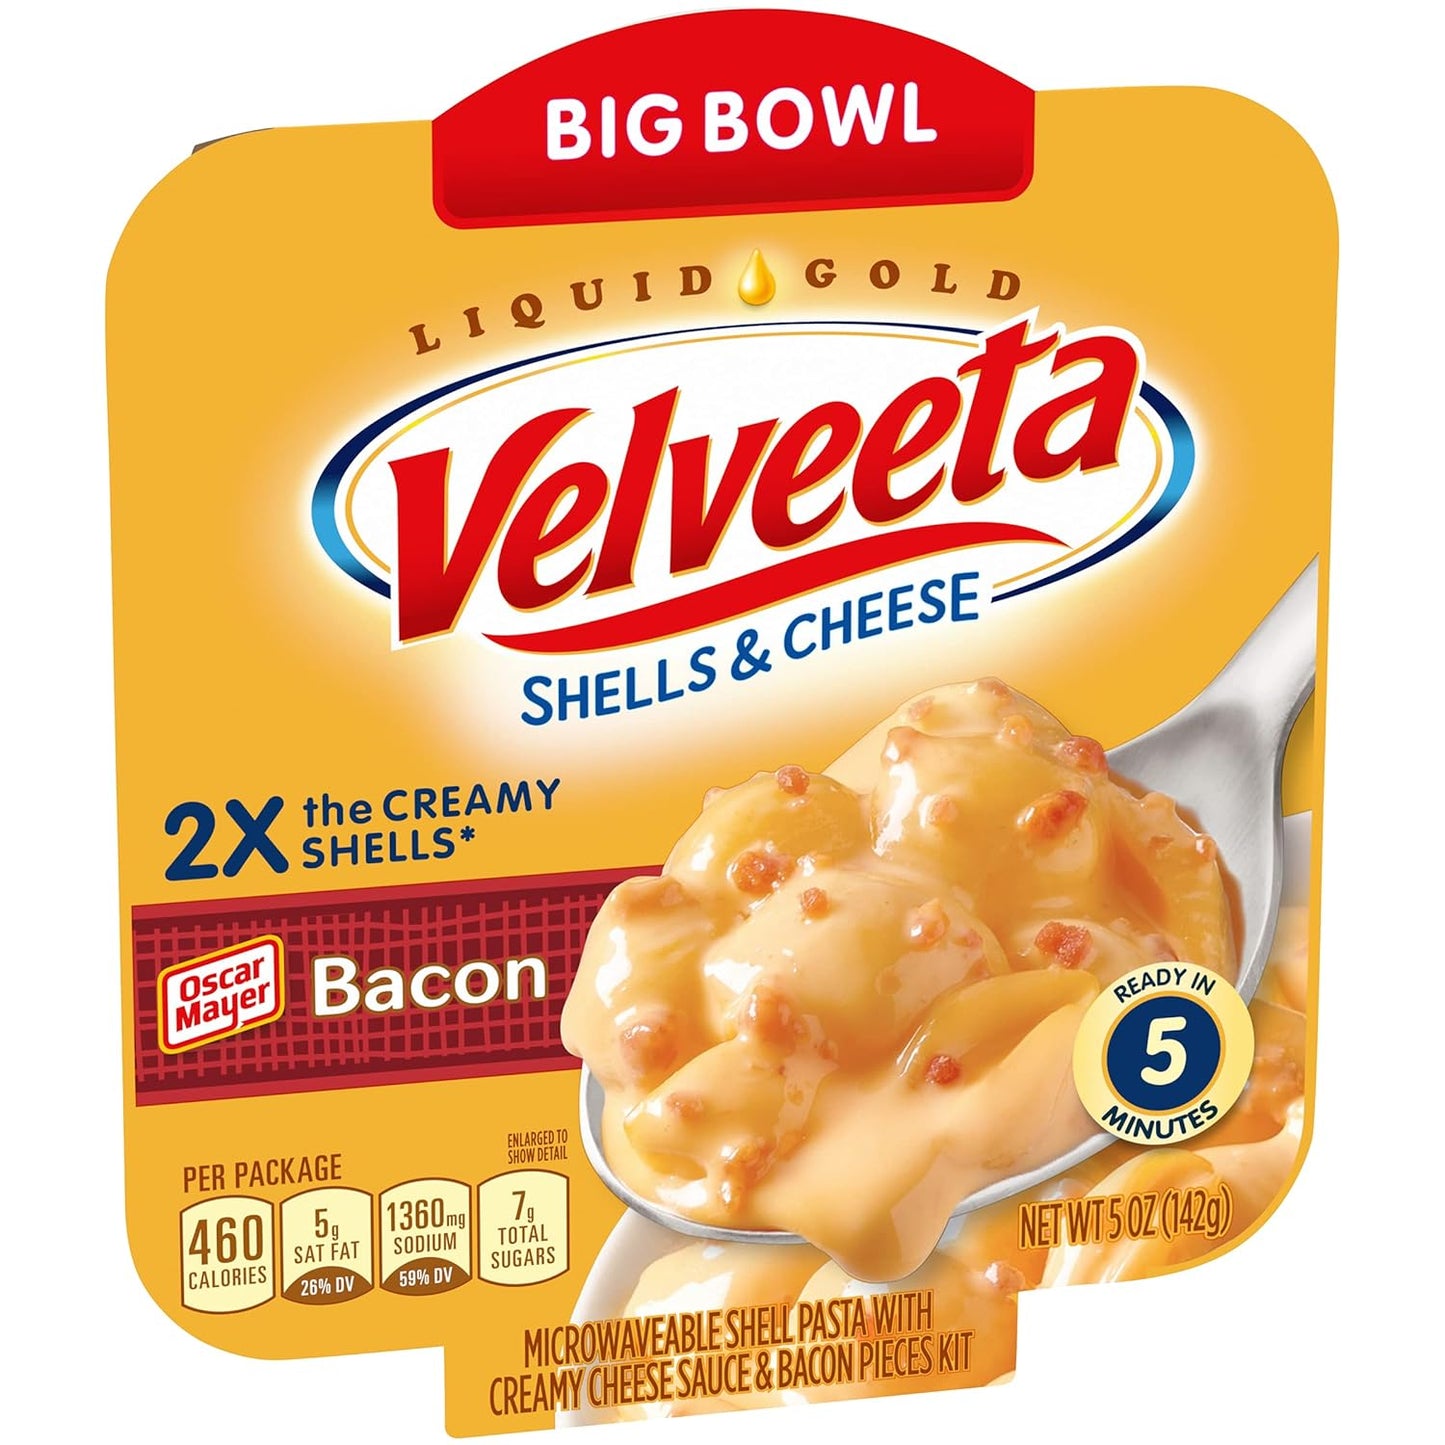 Bacon Shells & Cheese, 5 Oz. Microwavable Bowl (Pack of 6)